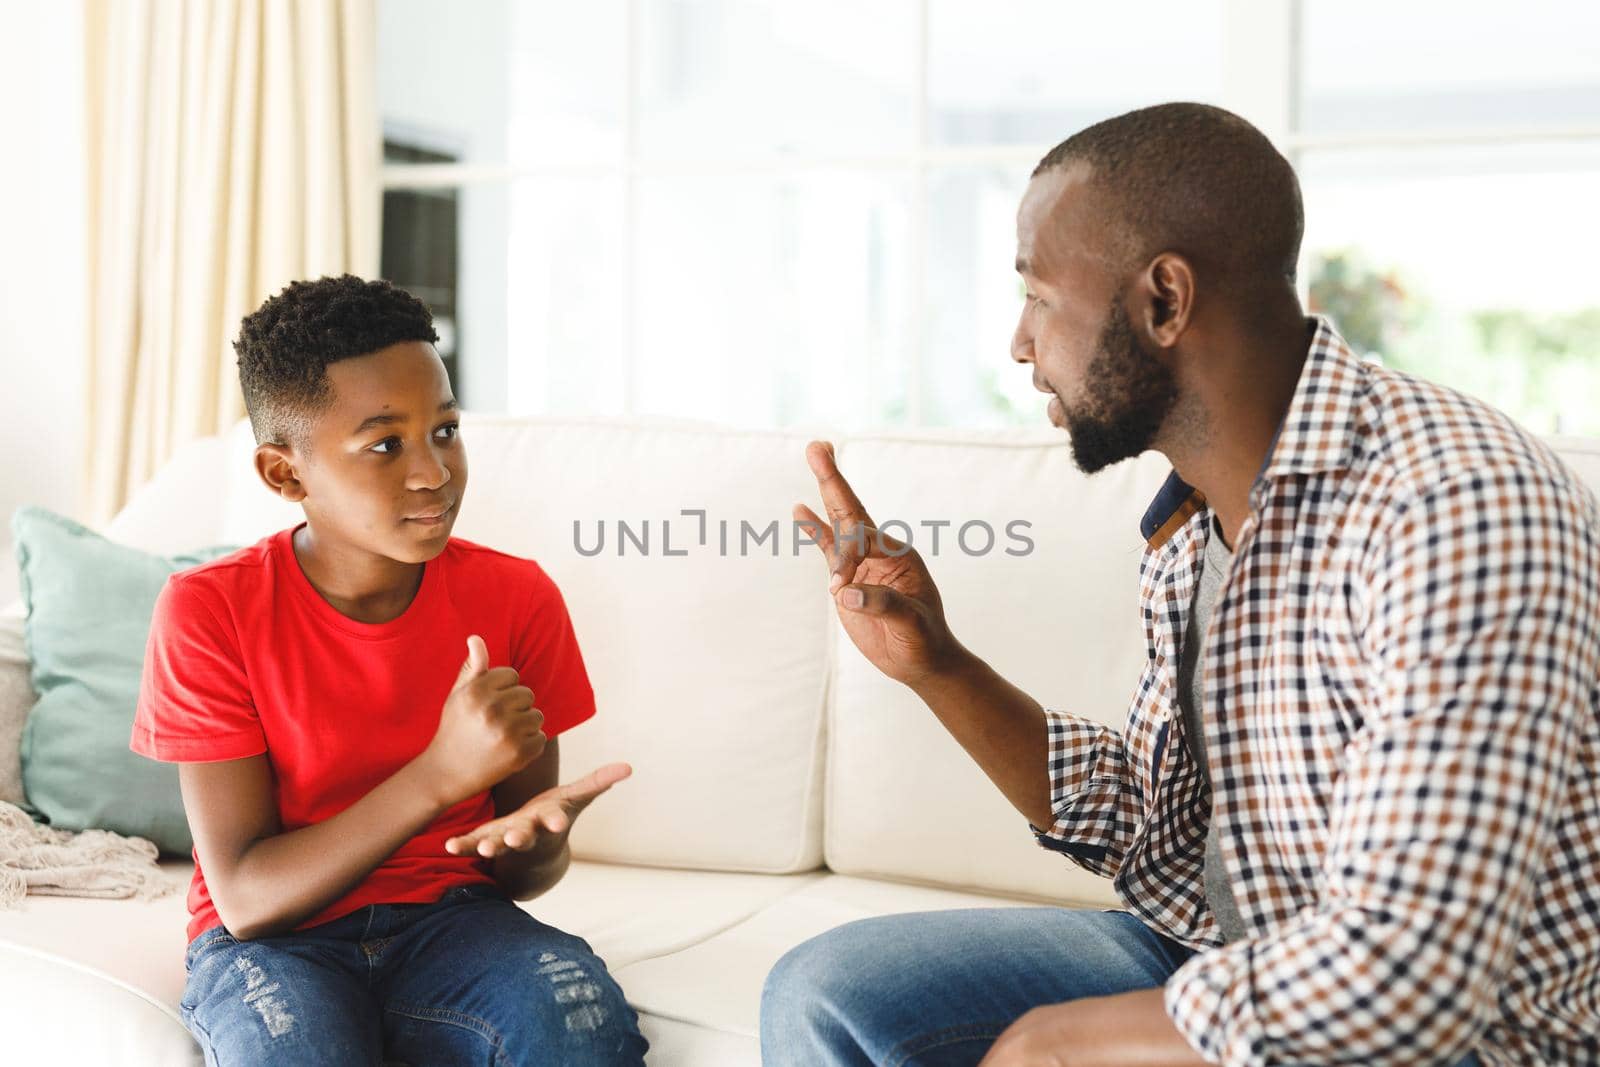 Happy african american father with son sitting on couch in living room talking sign language. father and son communicating without words.